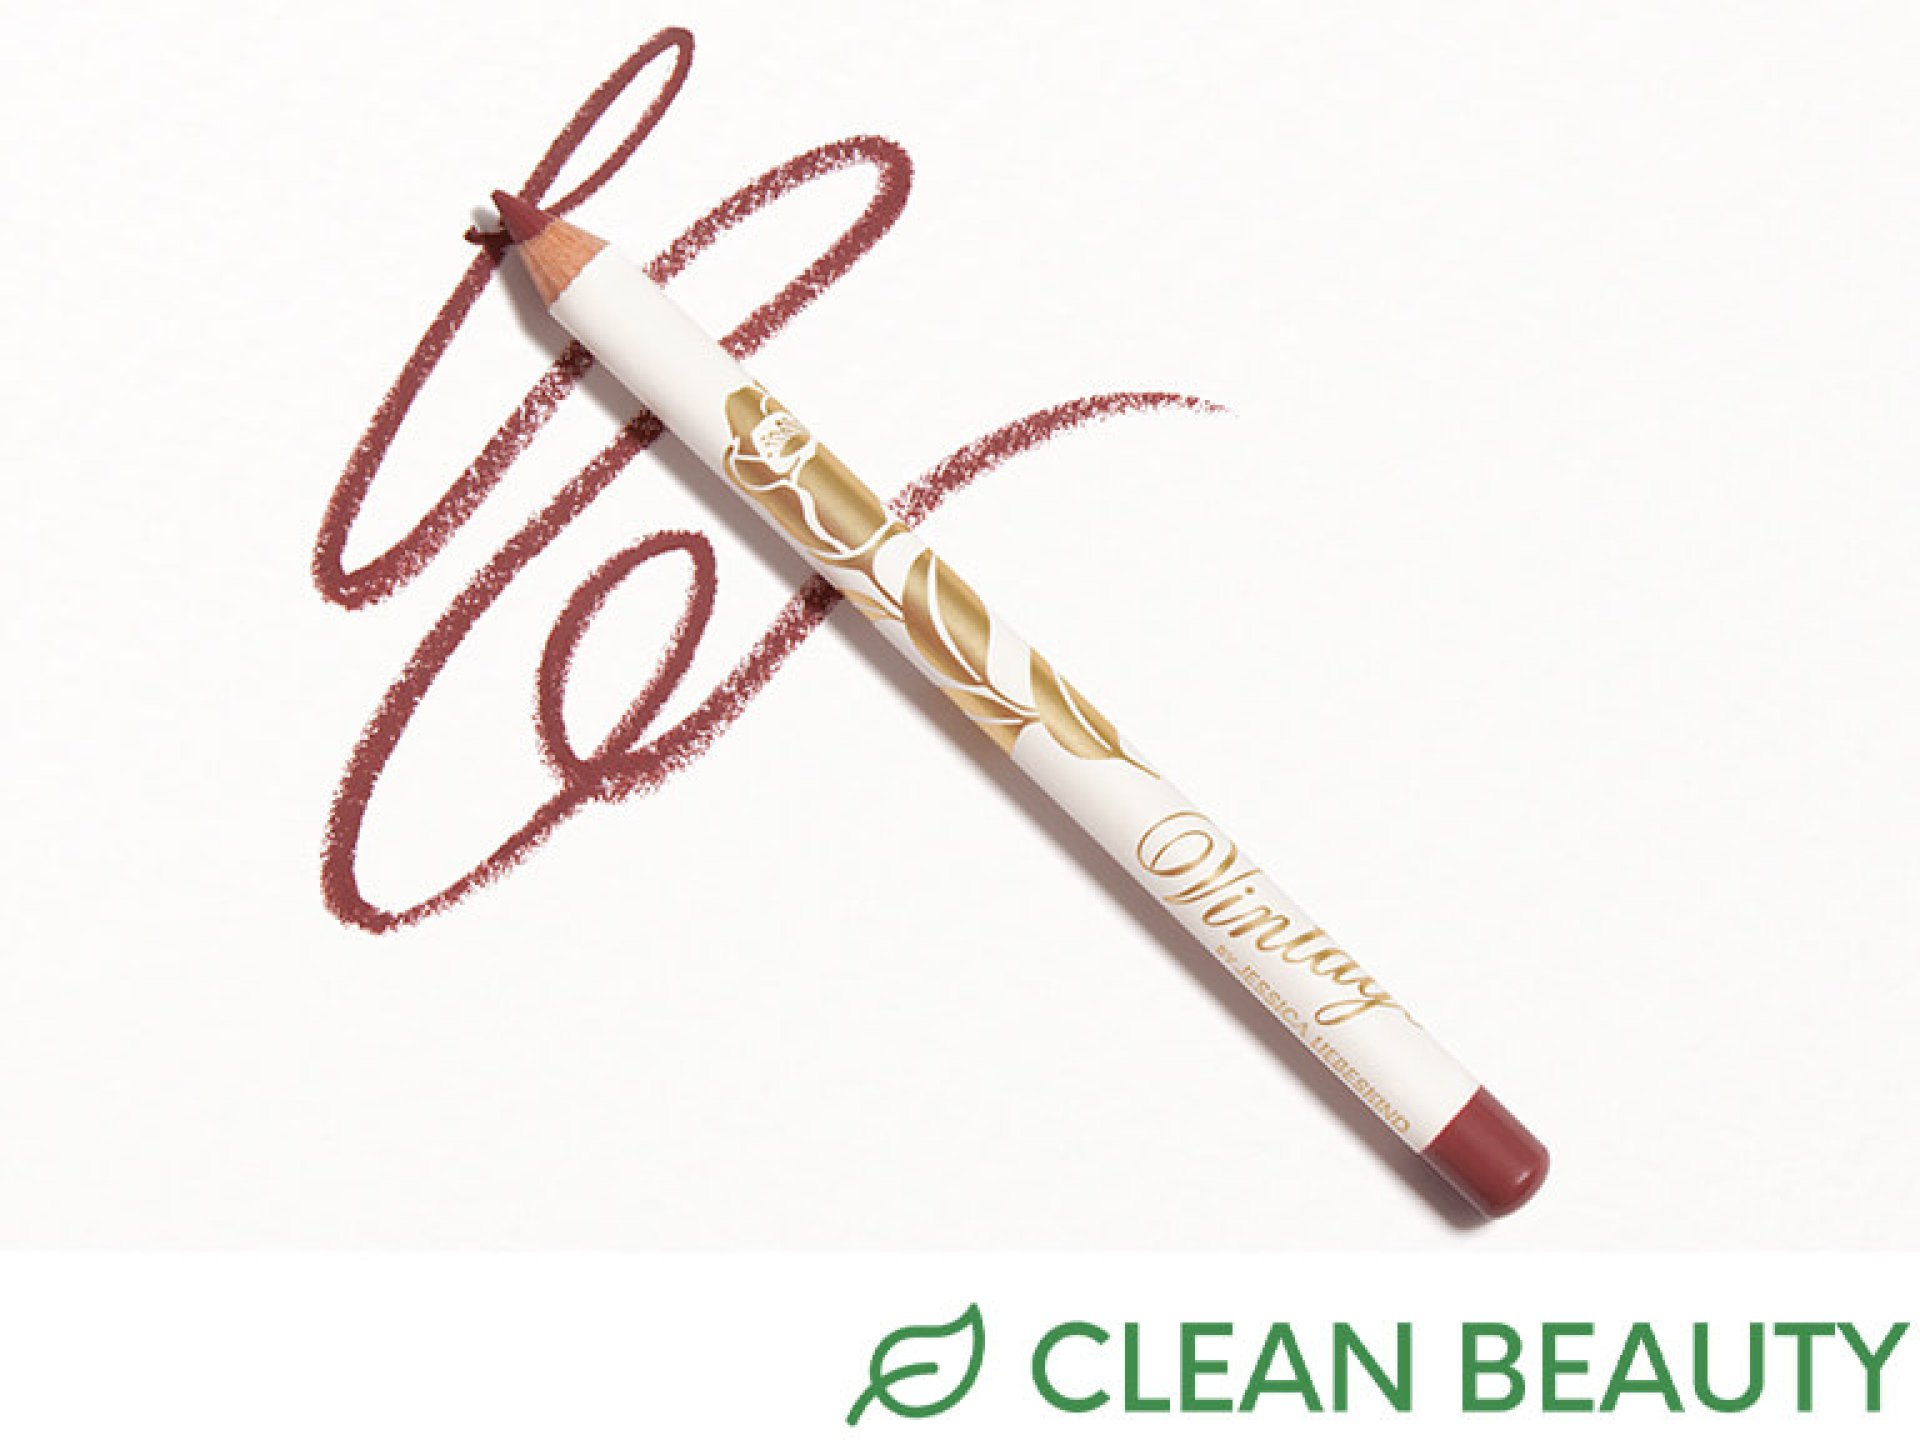 VINTAGE BY JESSICA LIEBESKIND Cashmere Lip Pencil in Mocha_Clean